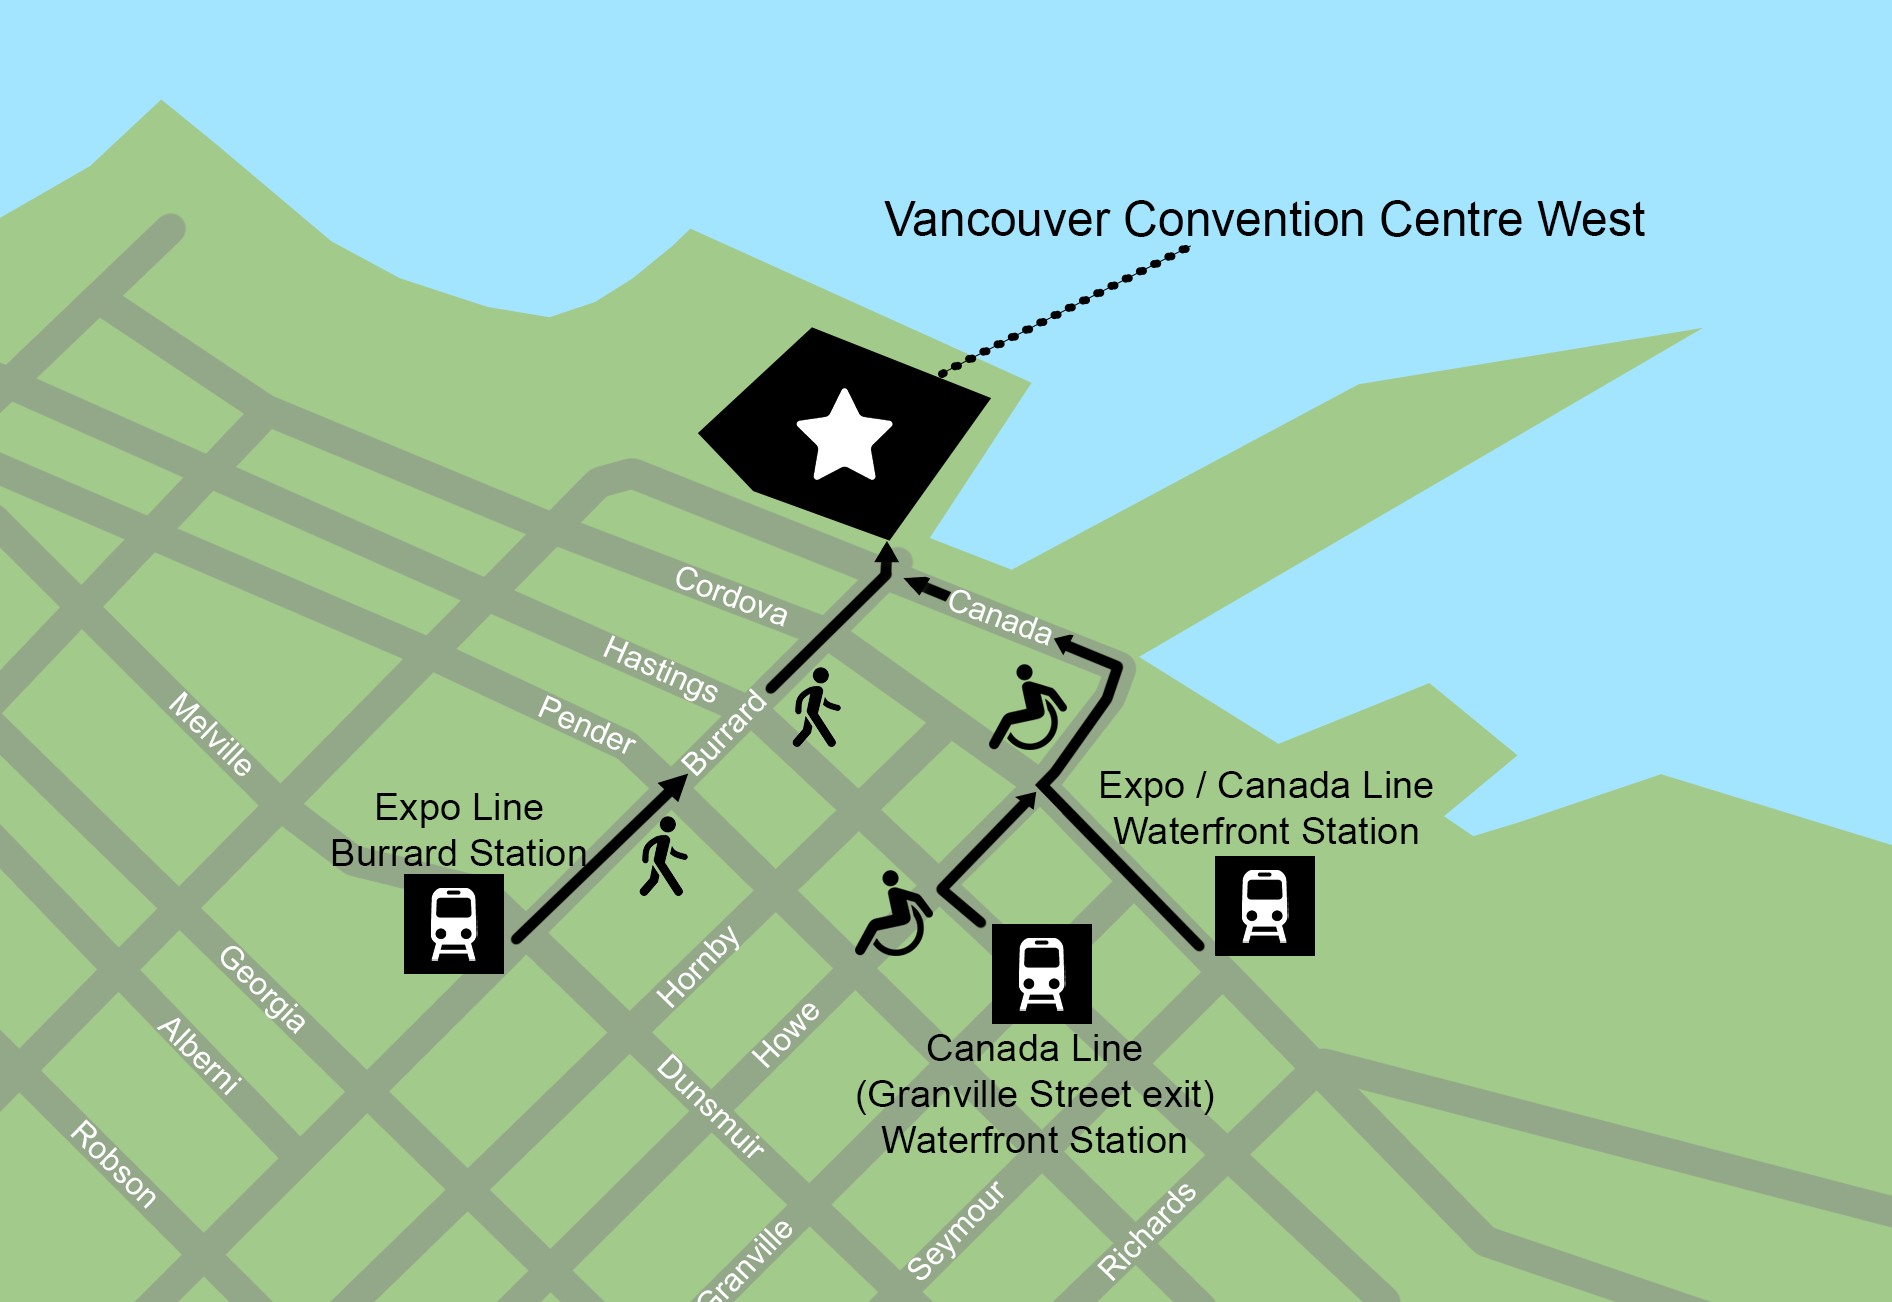 Map of public transport suggestions to Vancouver Convention Centre West.